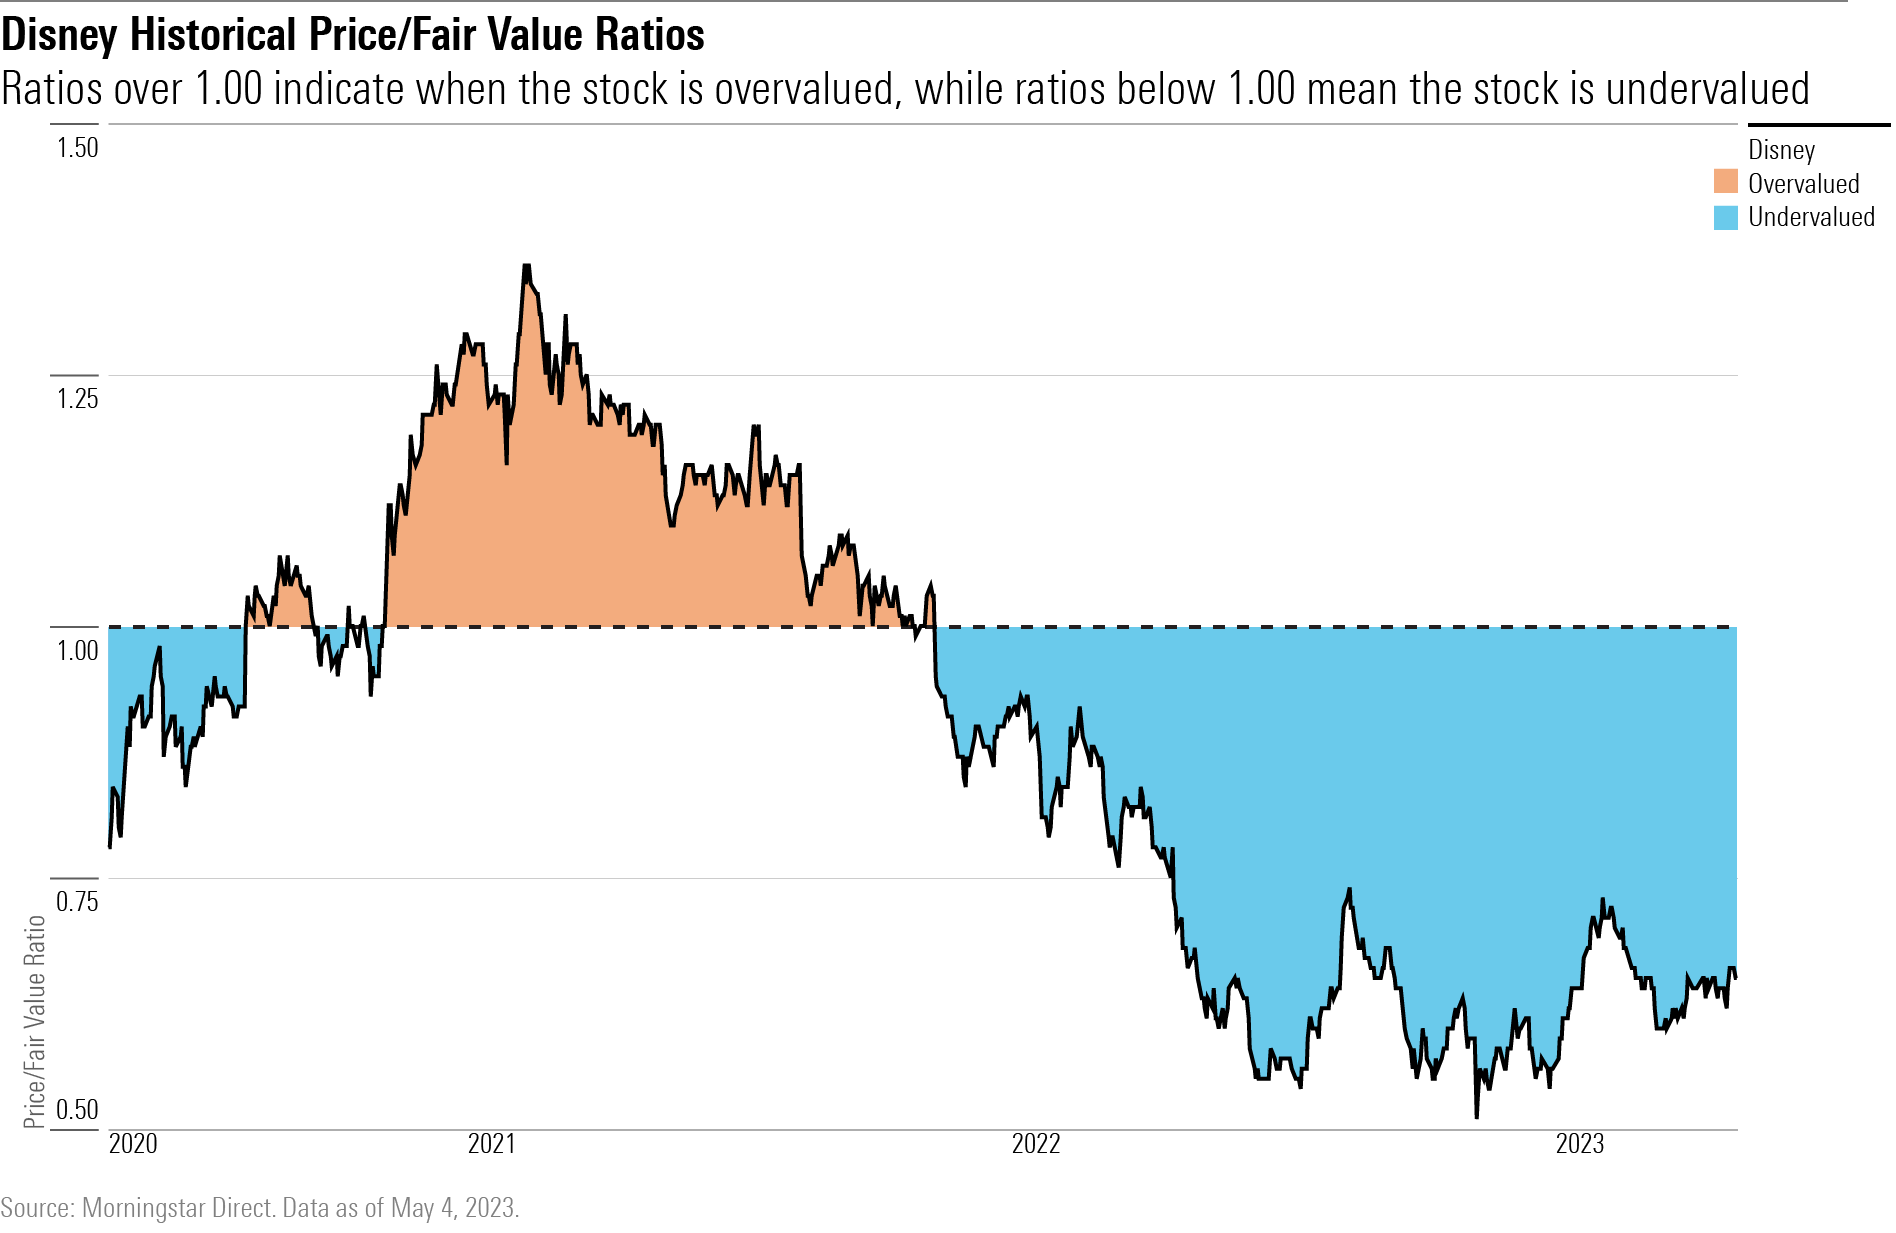 A colored line graph showing Disney's historical price/fair value ratio from 2020 to 2023